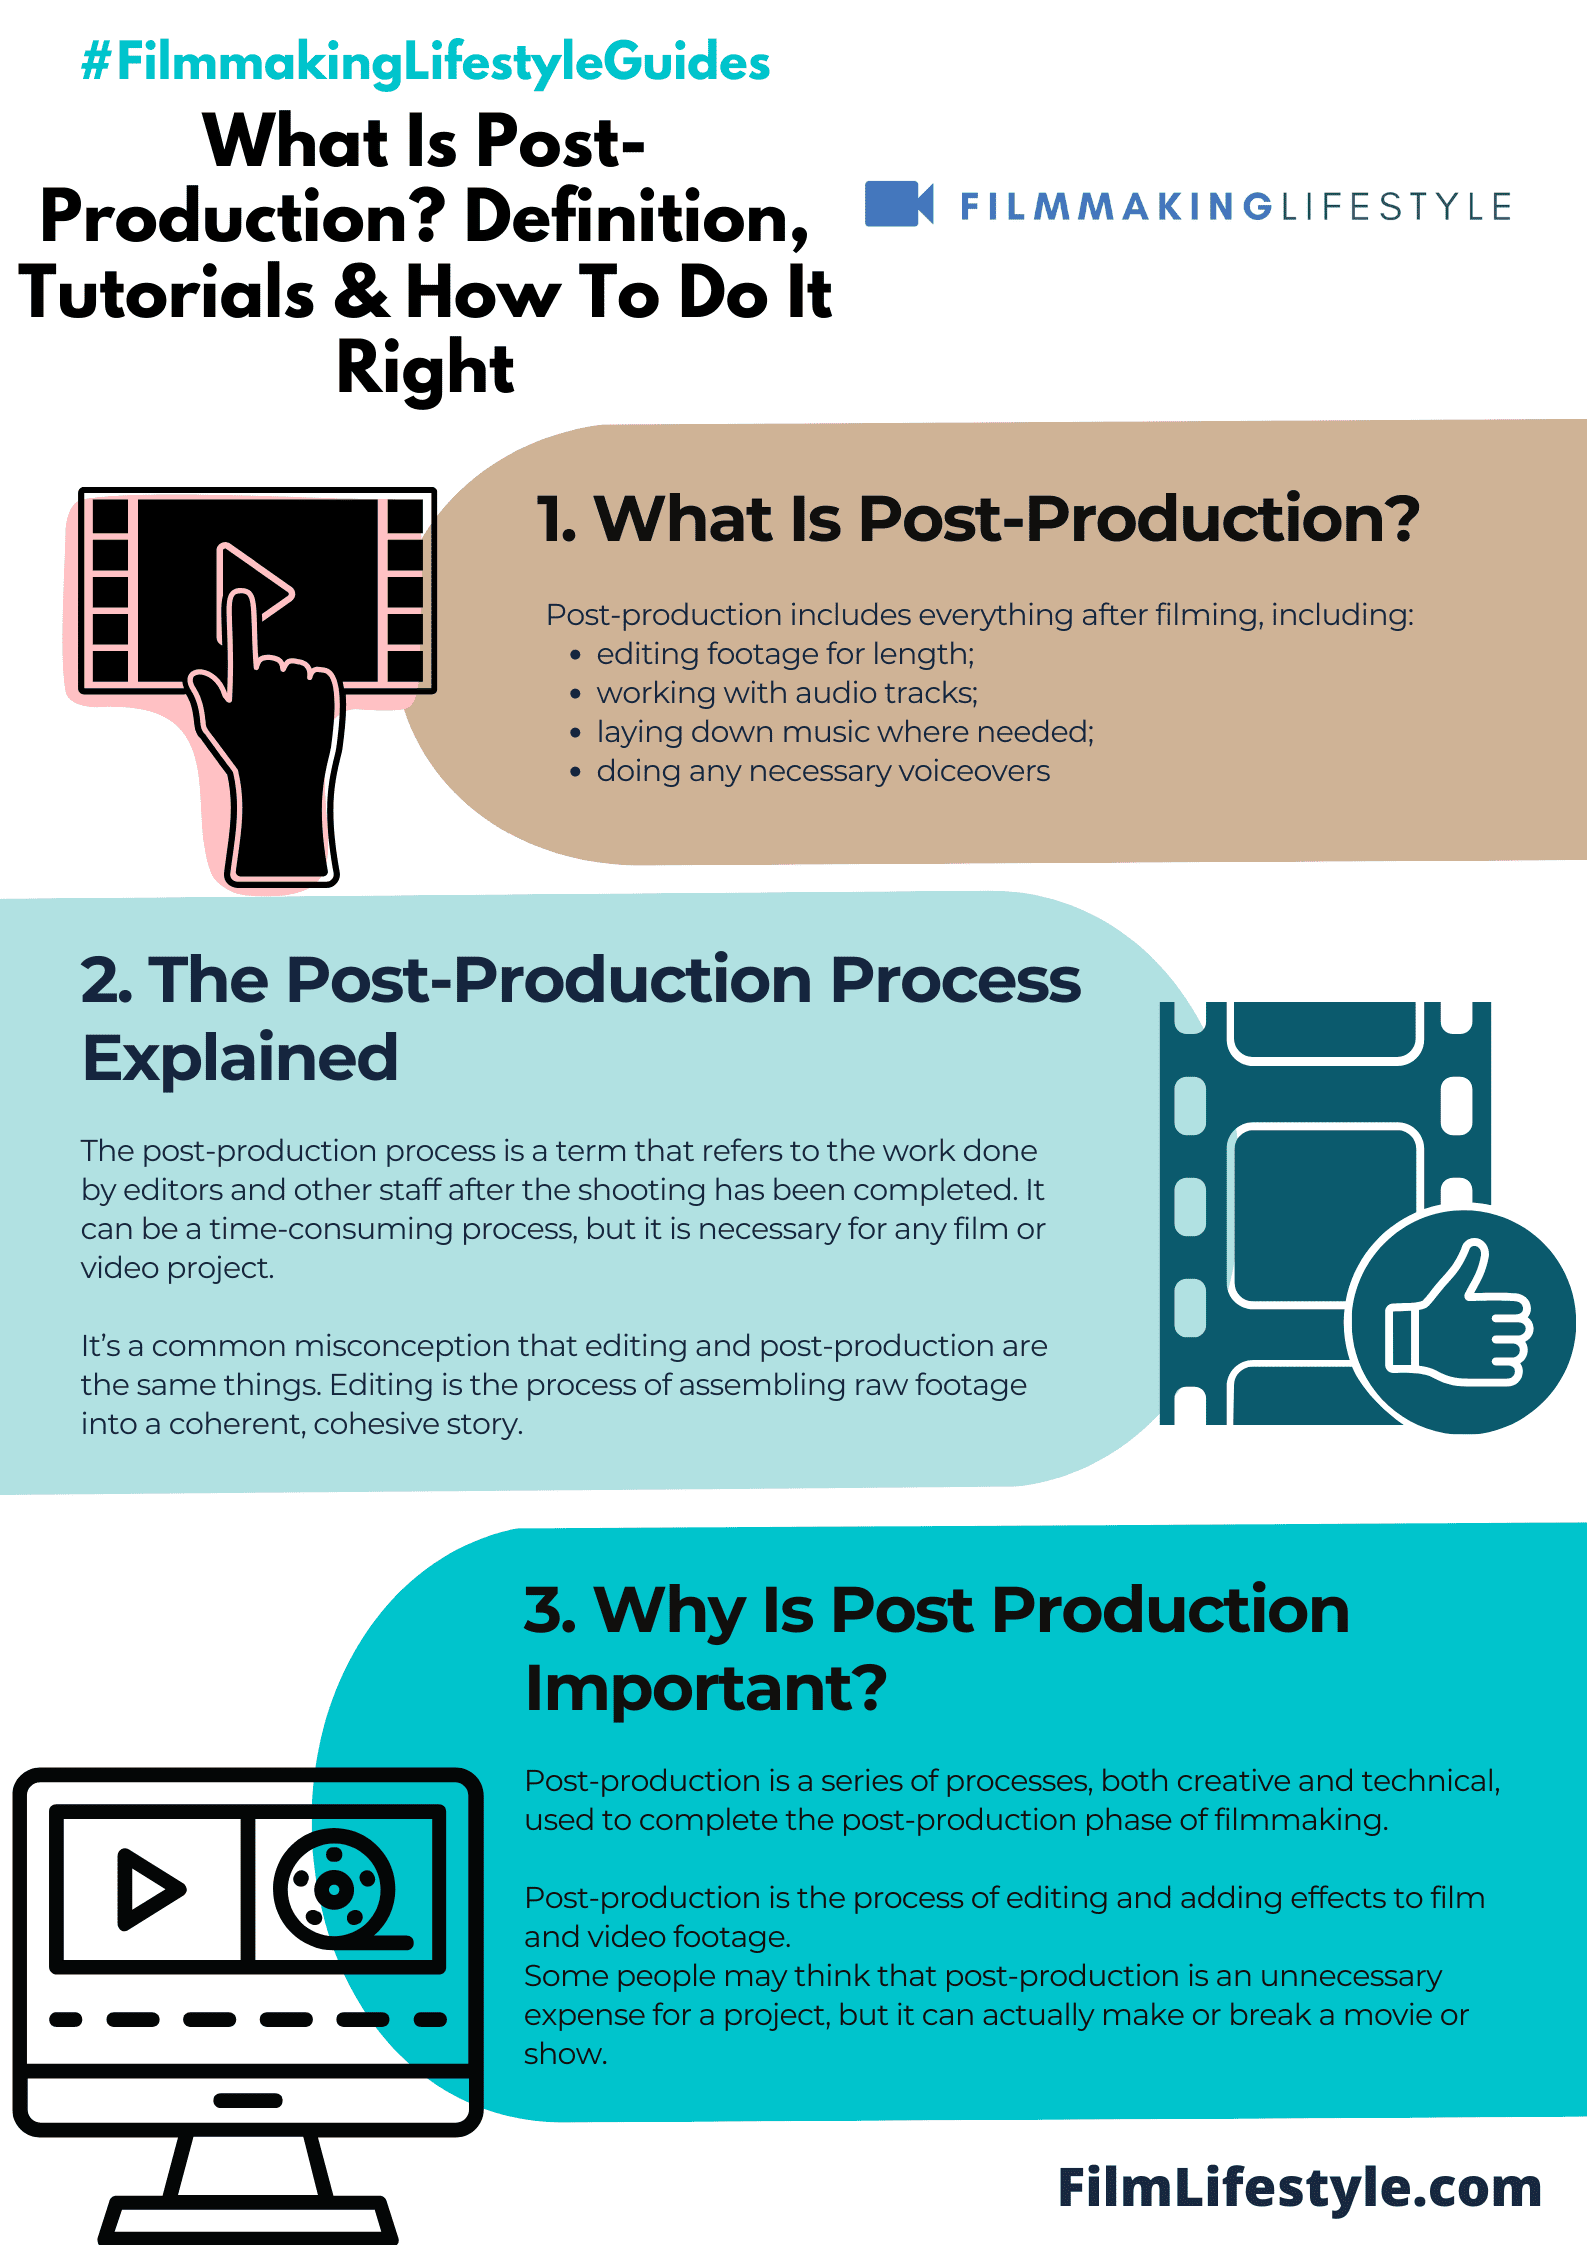 What Is Post-Production